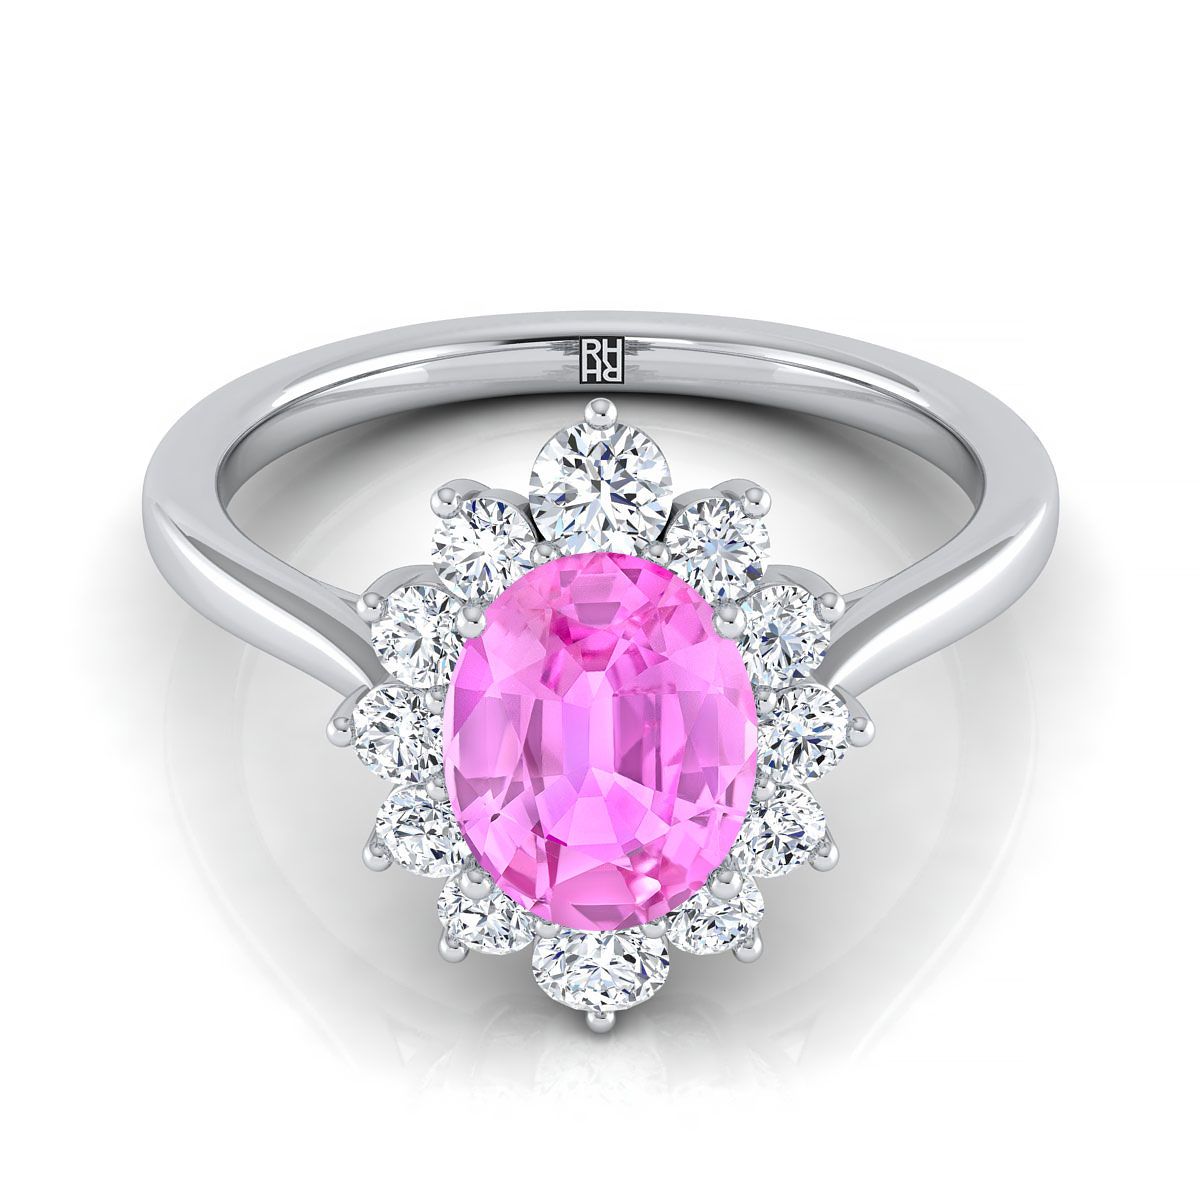 14K White Gold Oval Pink Sapphire Floral Diamond Halo Engagement Ring -1/2ctw